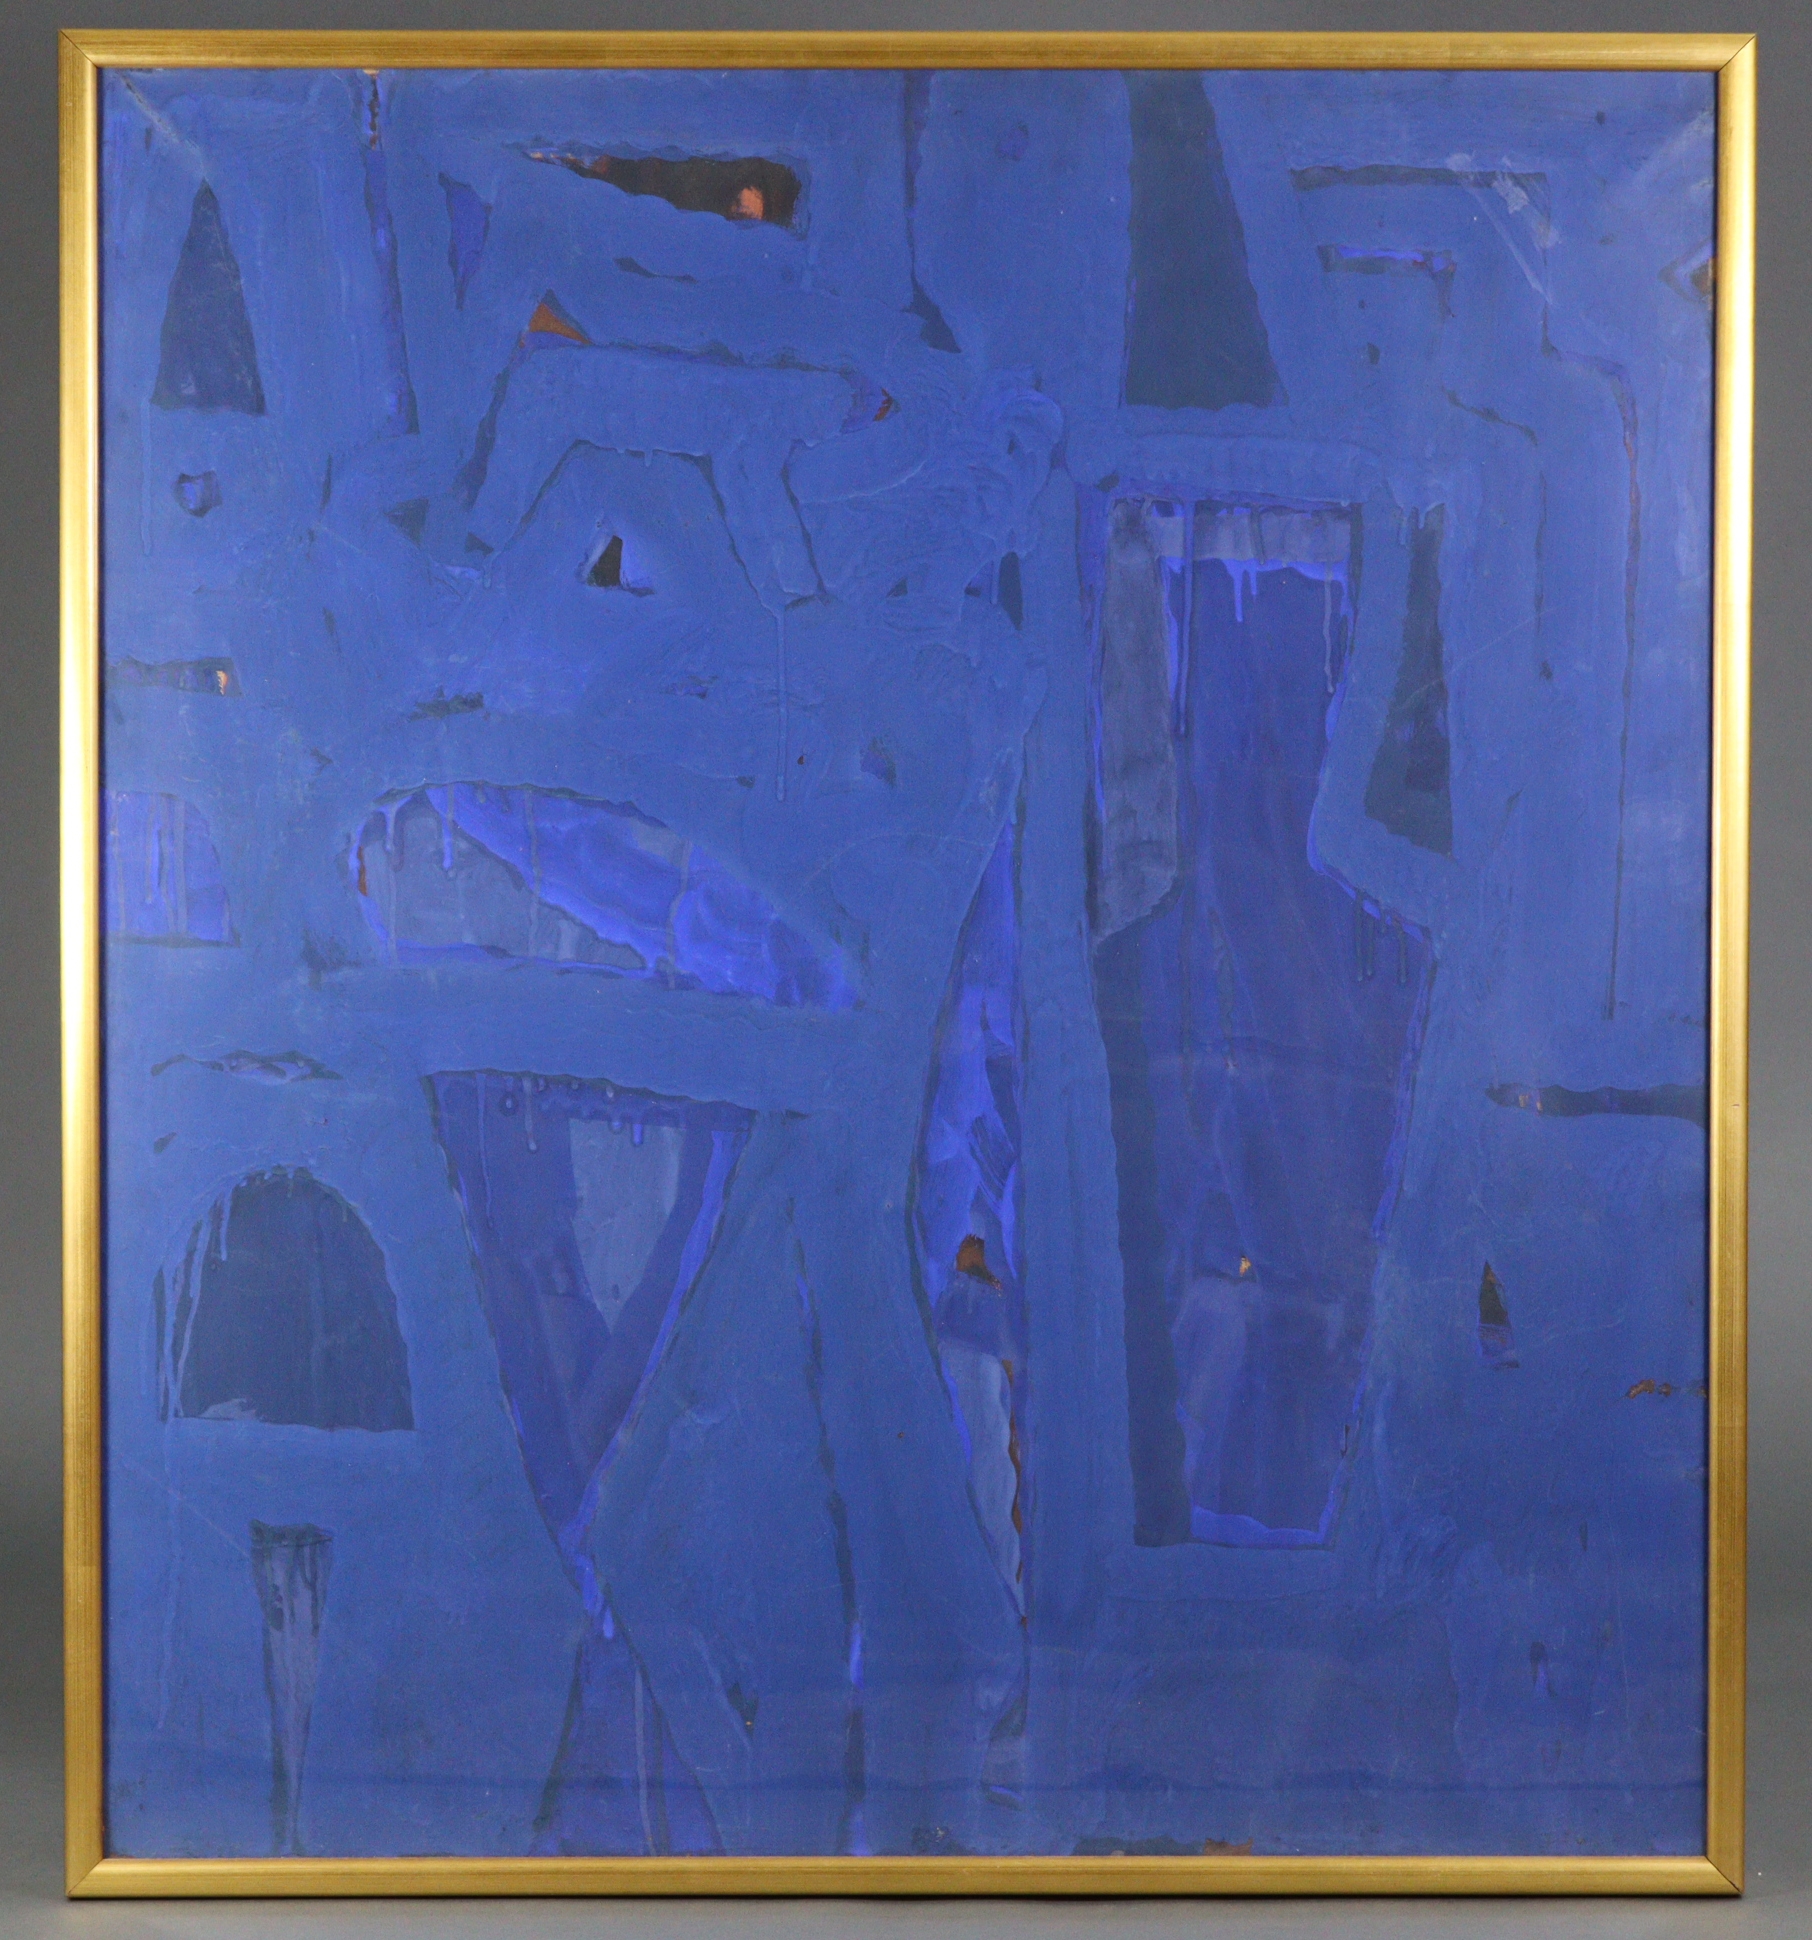 Artwork by Hung Rannou, HUNG RANNOU (b. 1955). A large abstract study in blue. Inscribed verso; oil on canvas: 39” x 35”. (Ex. Laire Du Verseau, Made of oil on canvas